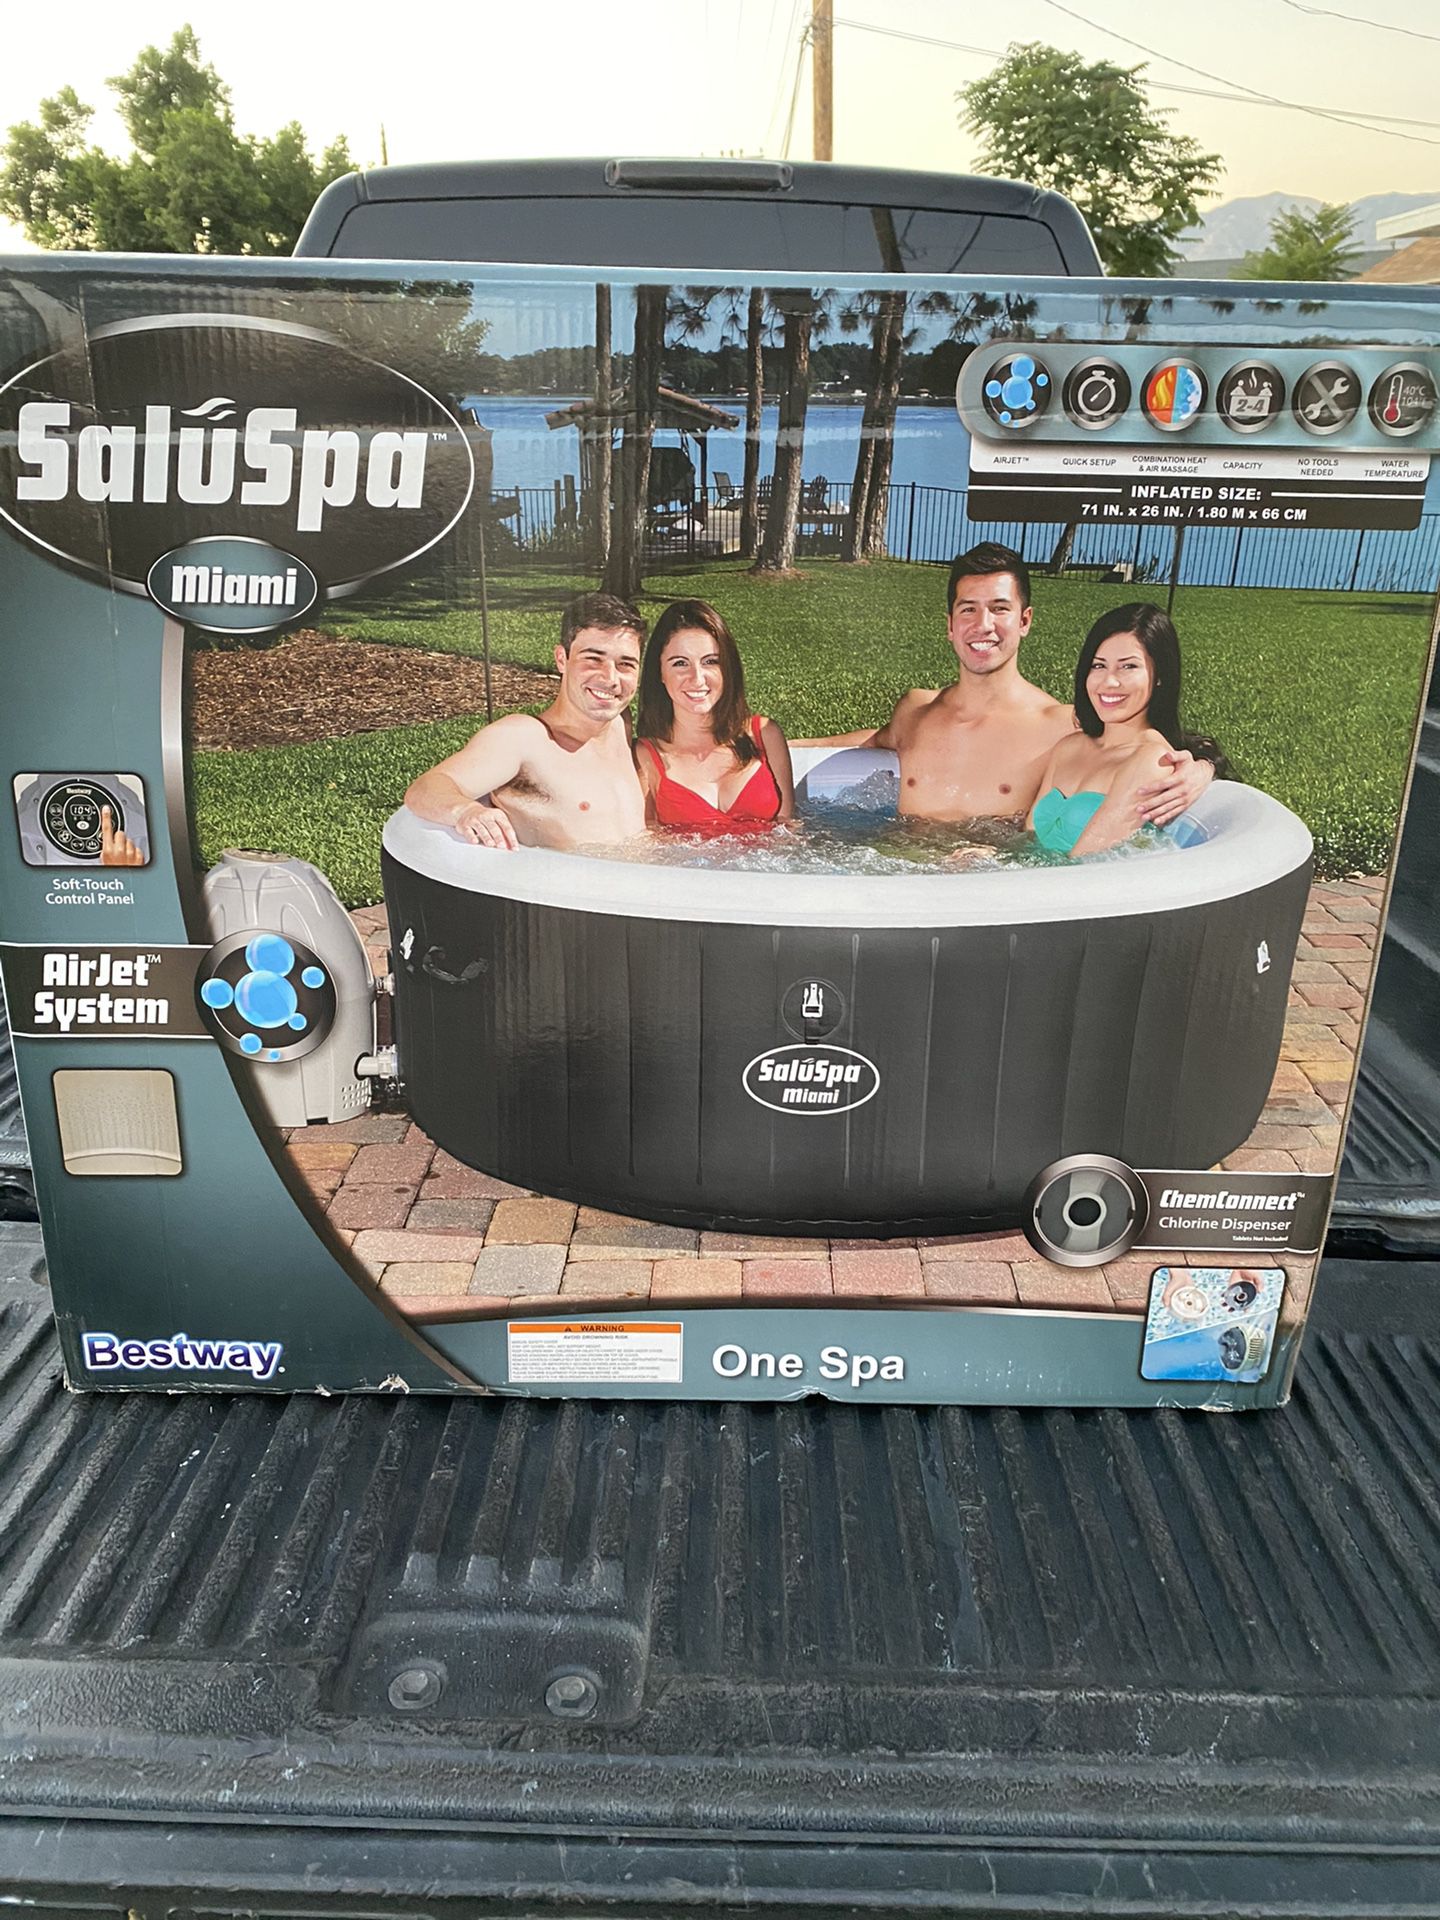 🏖 Bestway Miami Hot Tub Jacuzzi Spa above ground pool, 4-person, Black Coleman 🏖 FREE LOCAL DELIVERY WITHIN 45 MILES